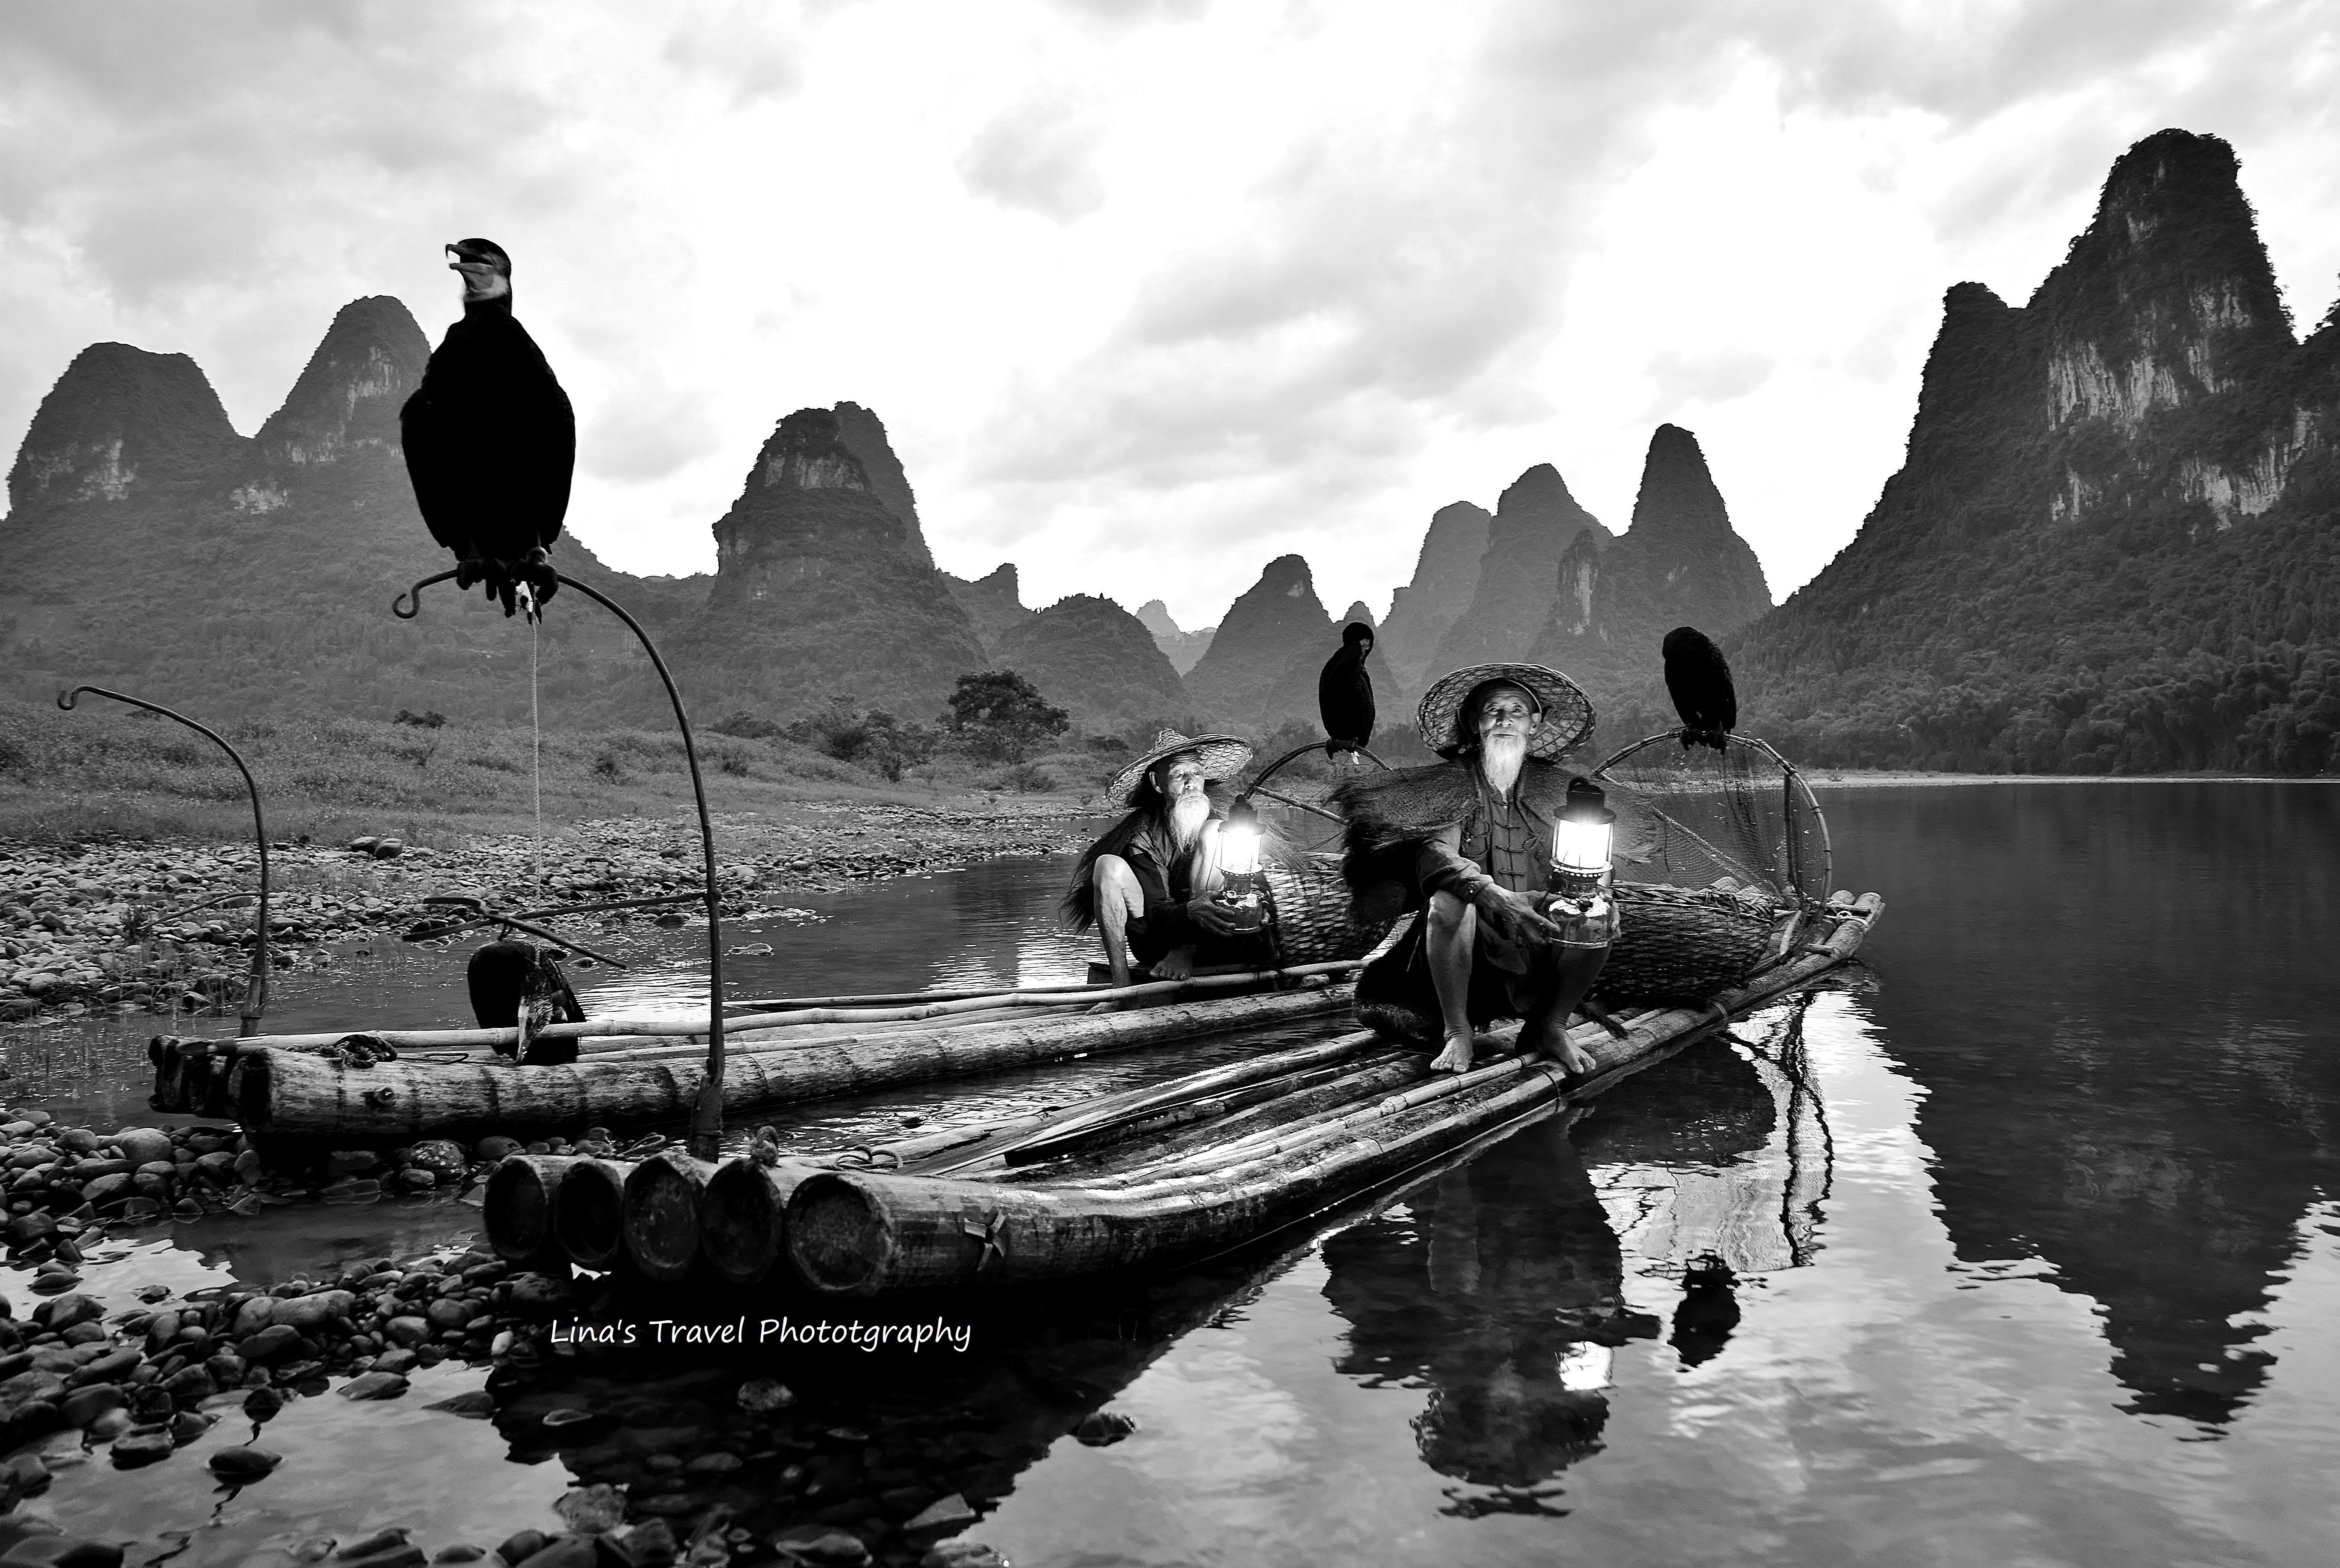 Cormorant fishing is a traditional way of life at Li River in the past, Yangshuo, China.